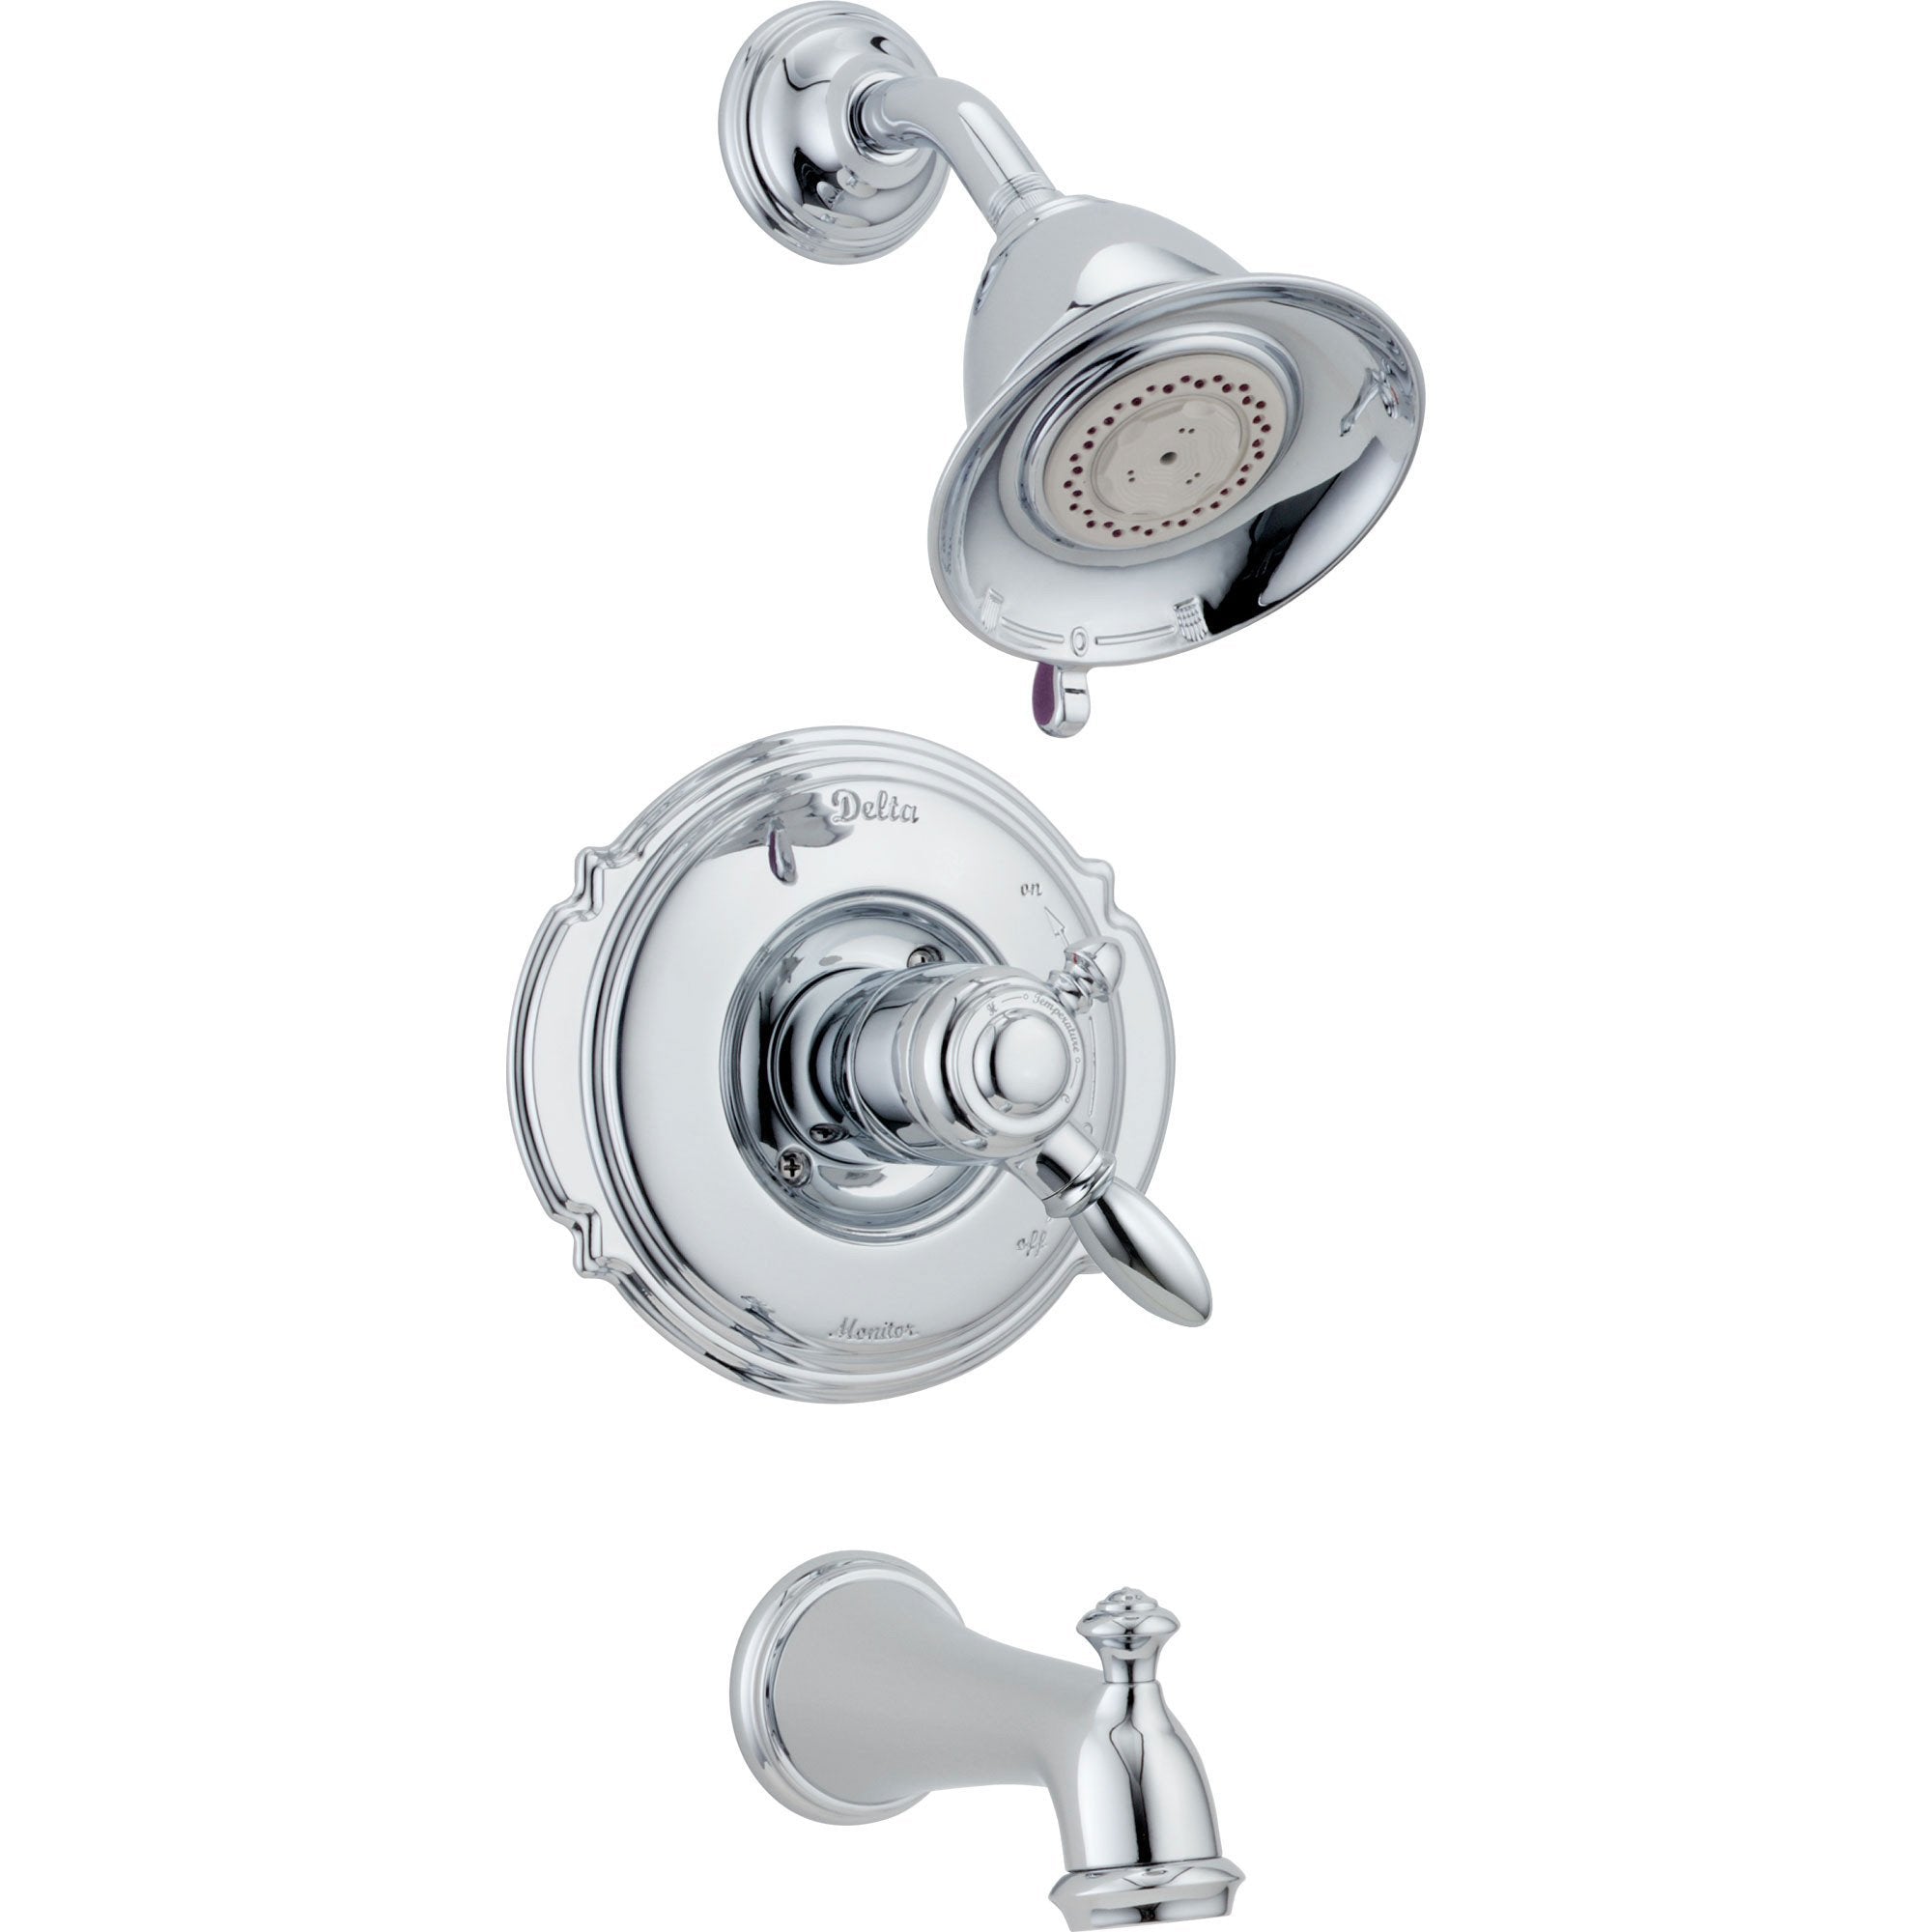 Delta Victorian Chrome Pressure Balanced Tub and Shower Faucet with Valve D386V